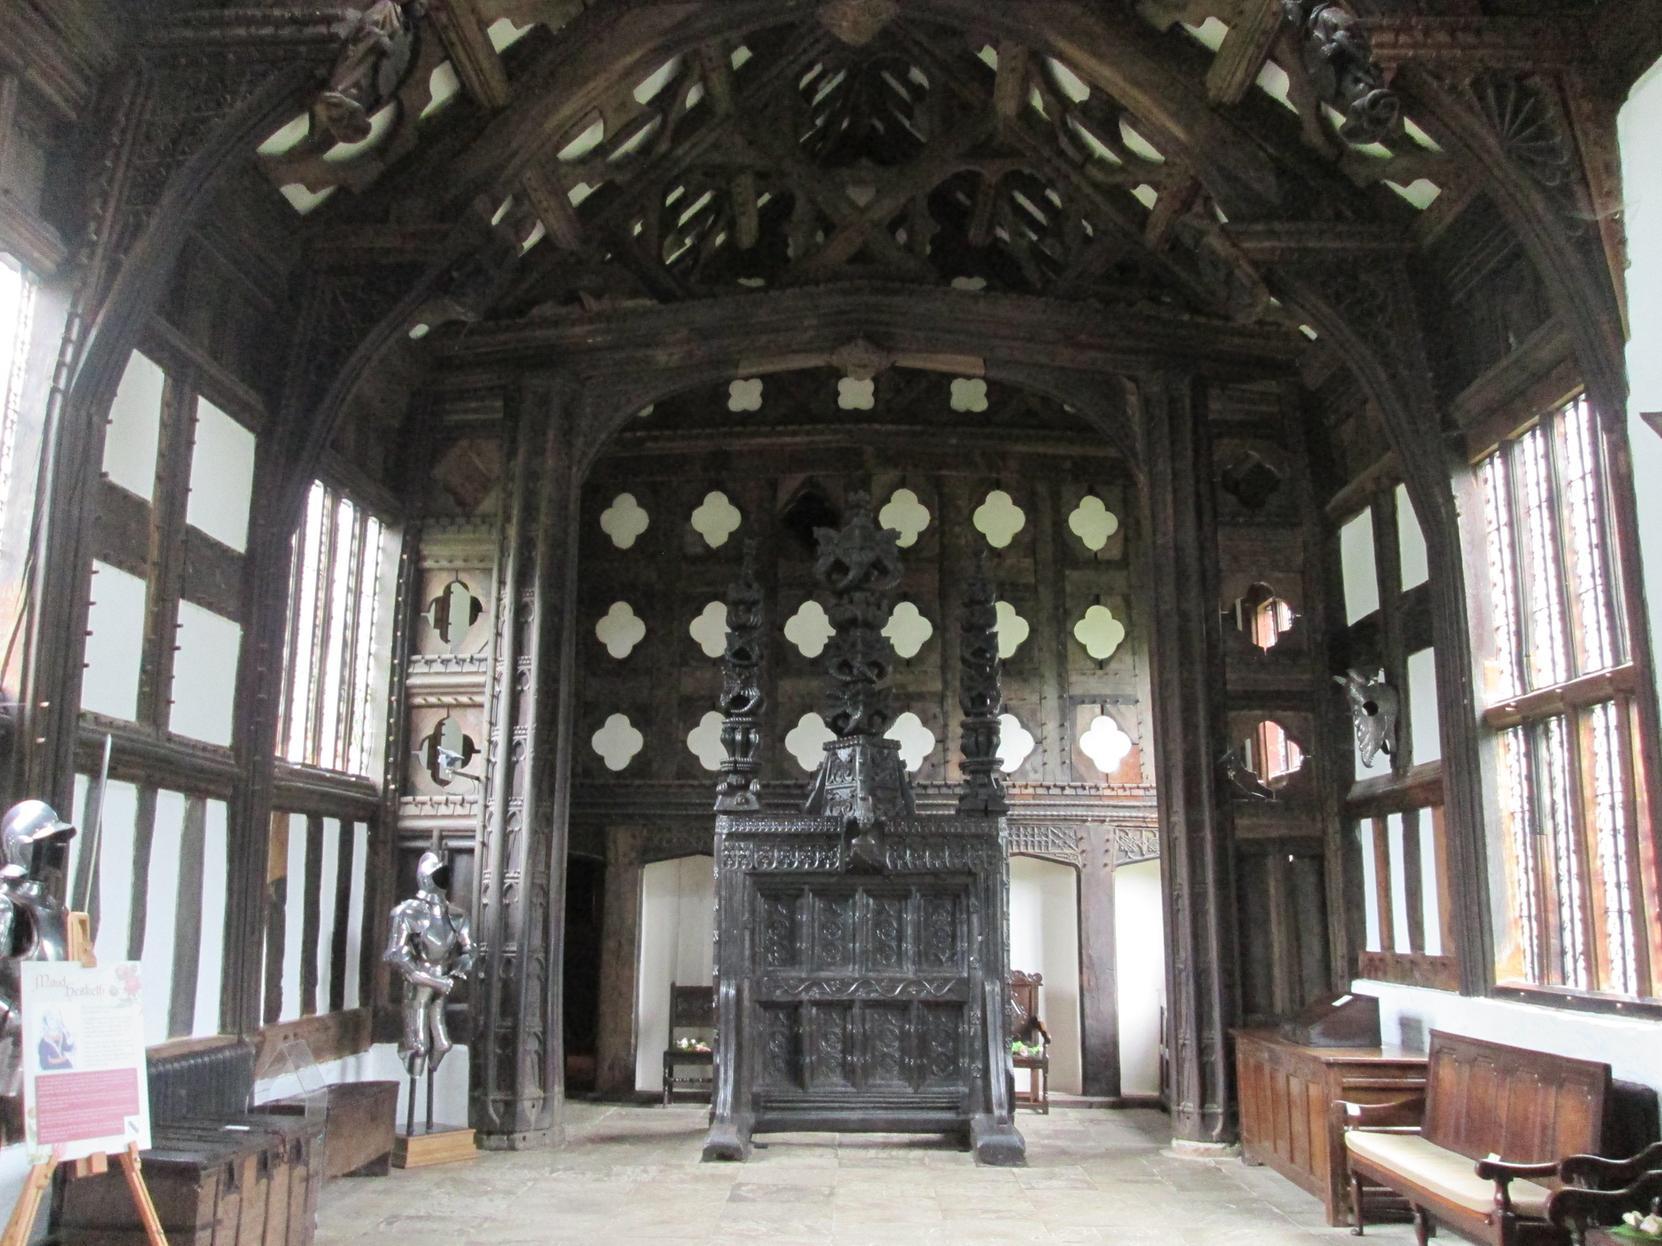 Rufford Old Hall, 200 Liverpool Road, Rufford, near Ormskirk, L40 1SG
A fine Tudor building, the home for stories of romance, wealth and 500 years of Hesketh family history. Be wowed by the Tudor Great Hall with its furniture, arms, armour, tapestries and the carved oak screen, a rare survivor from the 1500s.